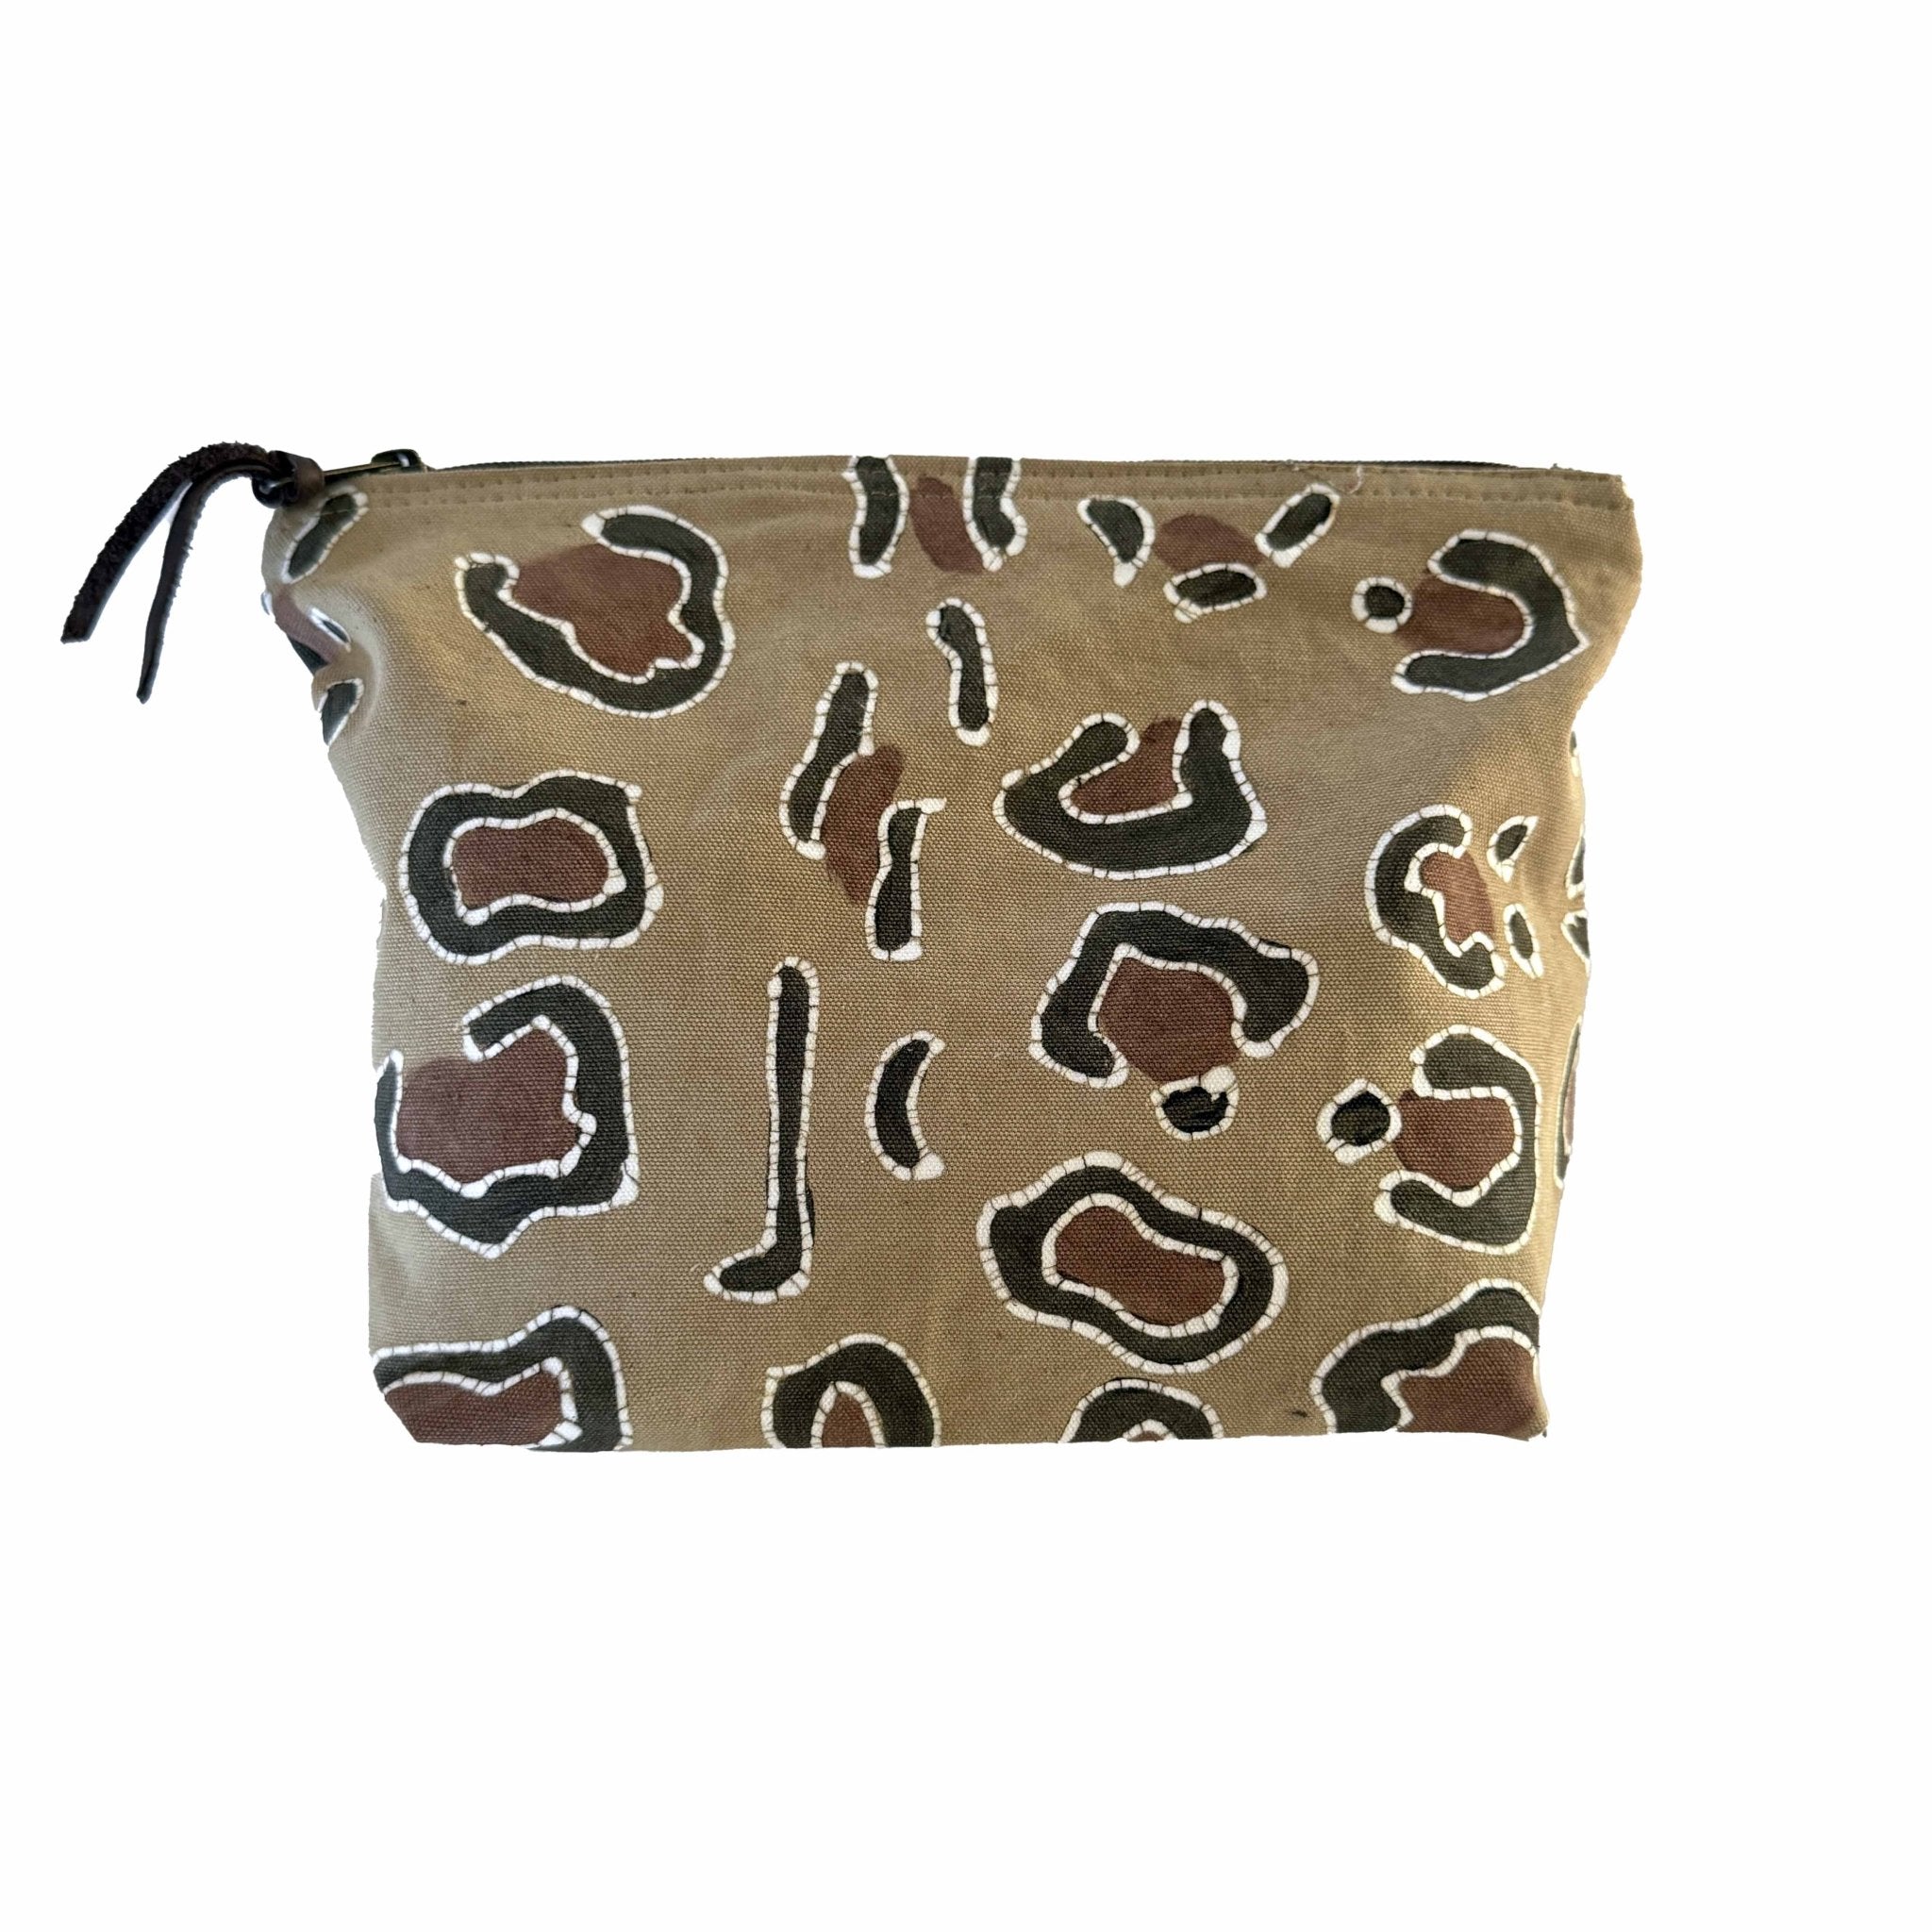 Leopard print ethically handcrafted travel wash bag.